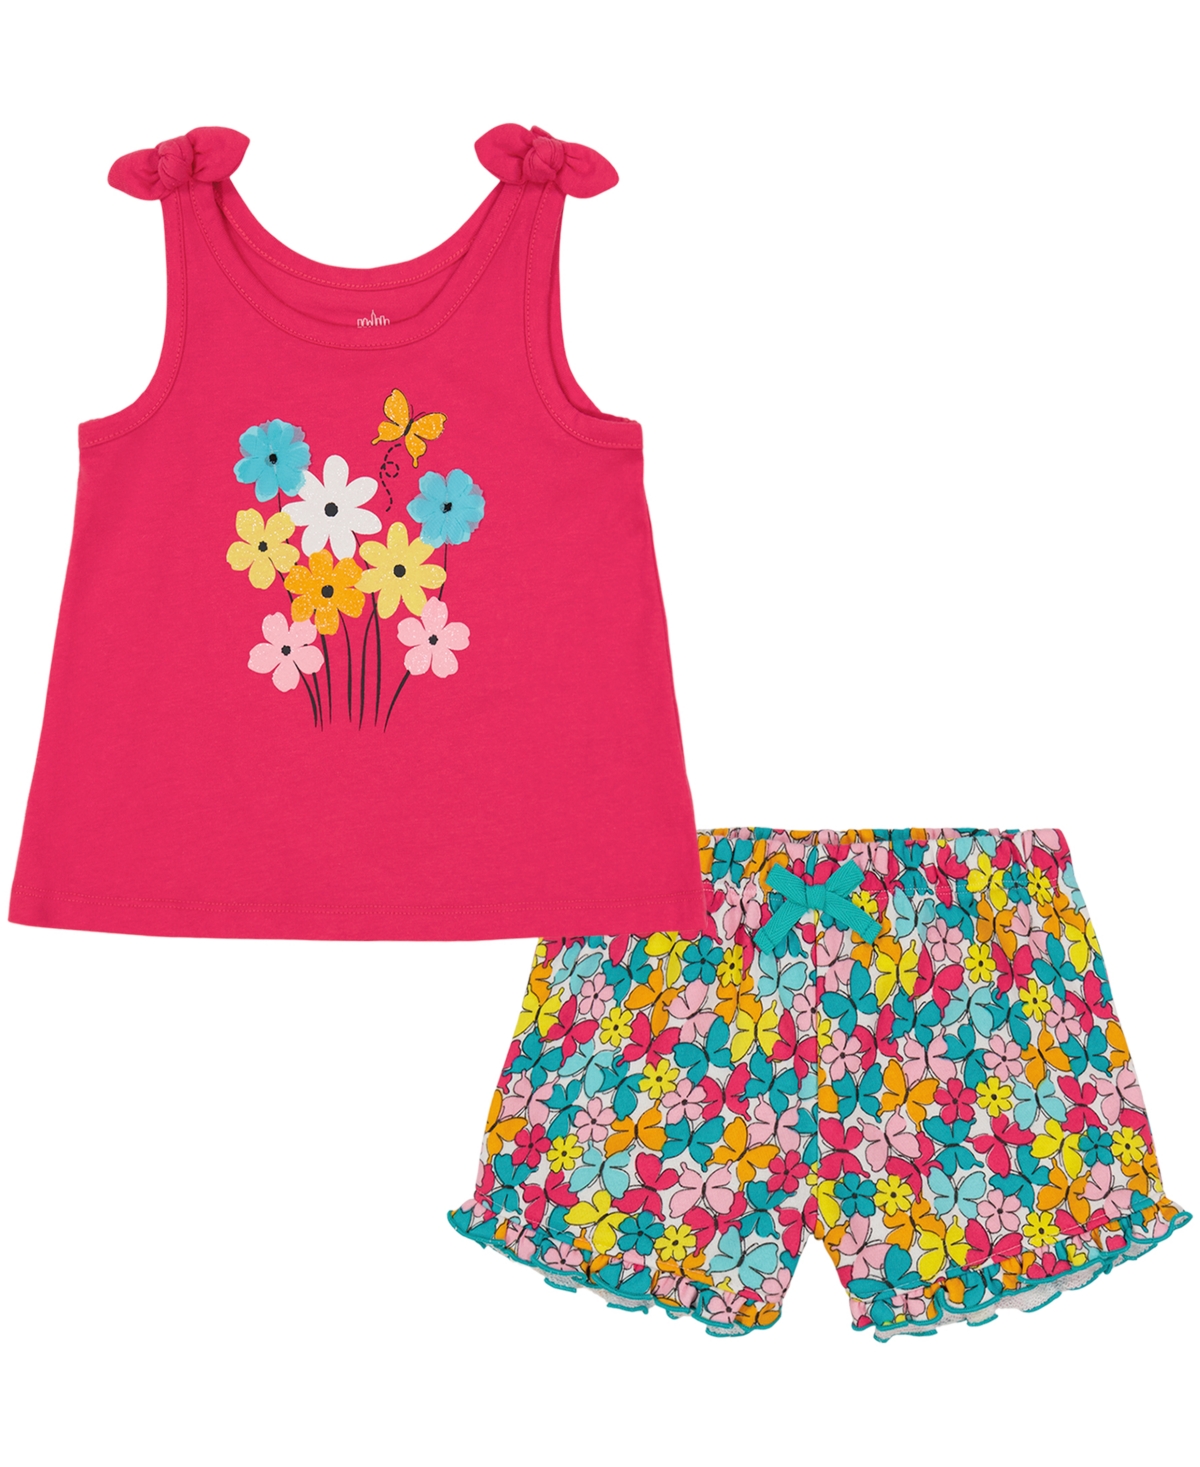 Kids Headquarters Toddler Girls Twist-tie Straps Top And Floral Ruffle Trim Terry Shorts Set, 2 Piece In Fushia Pink